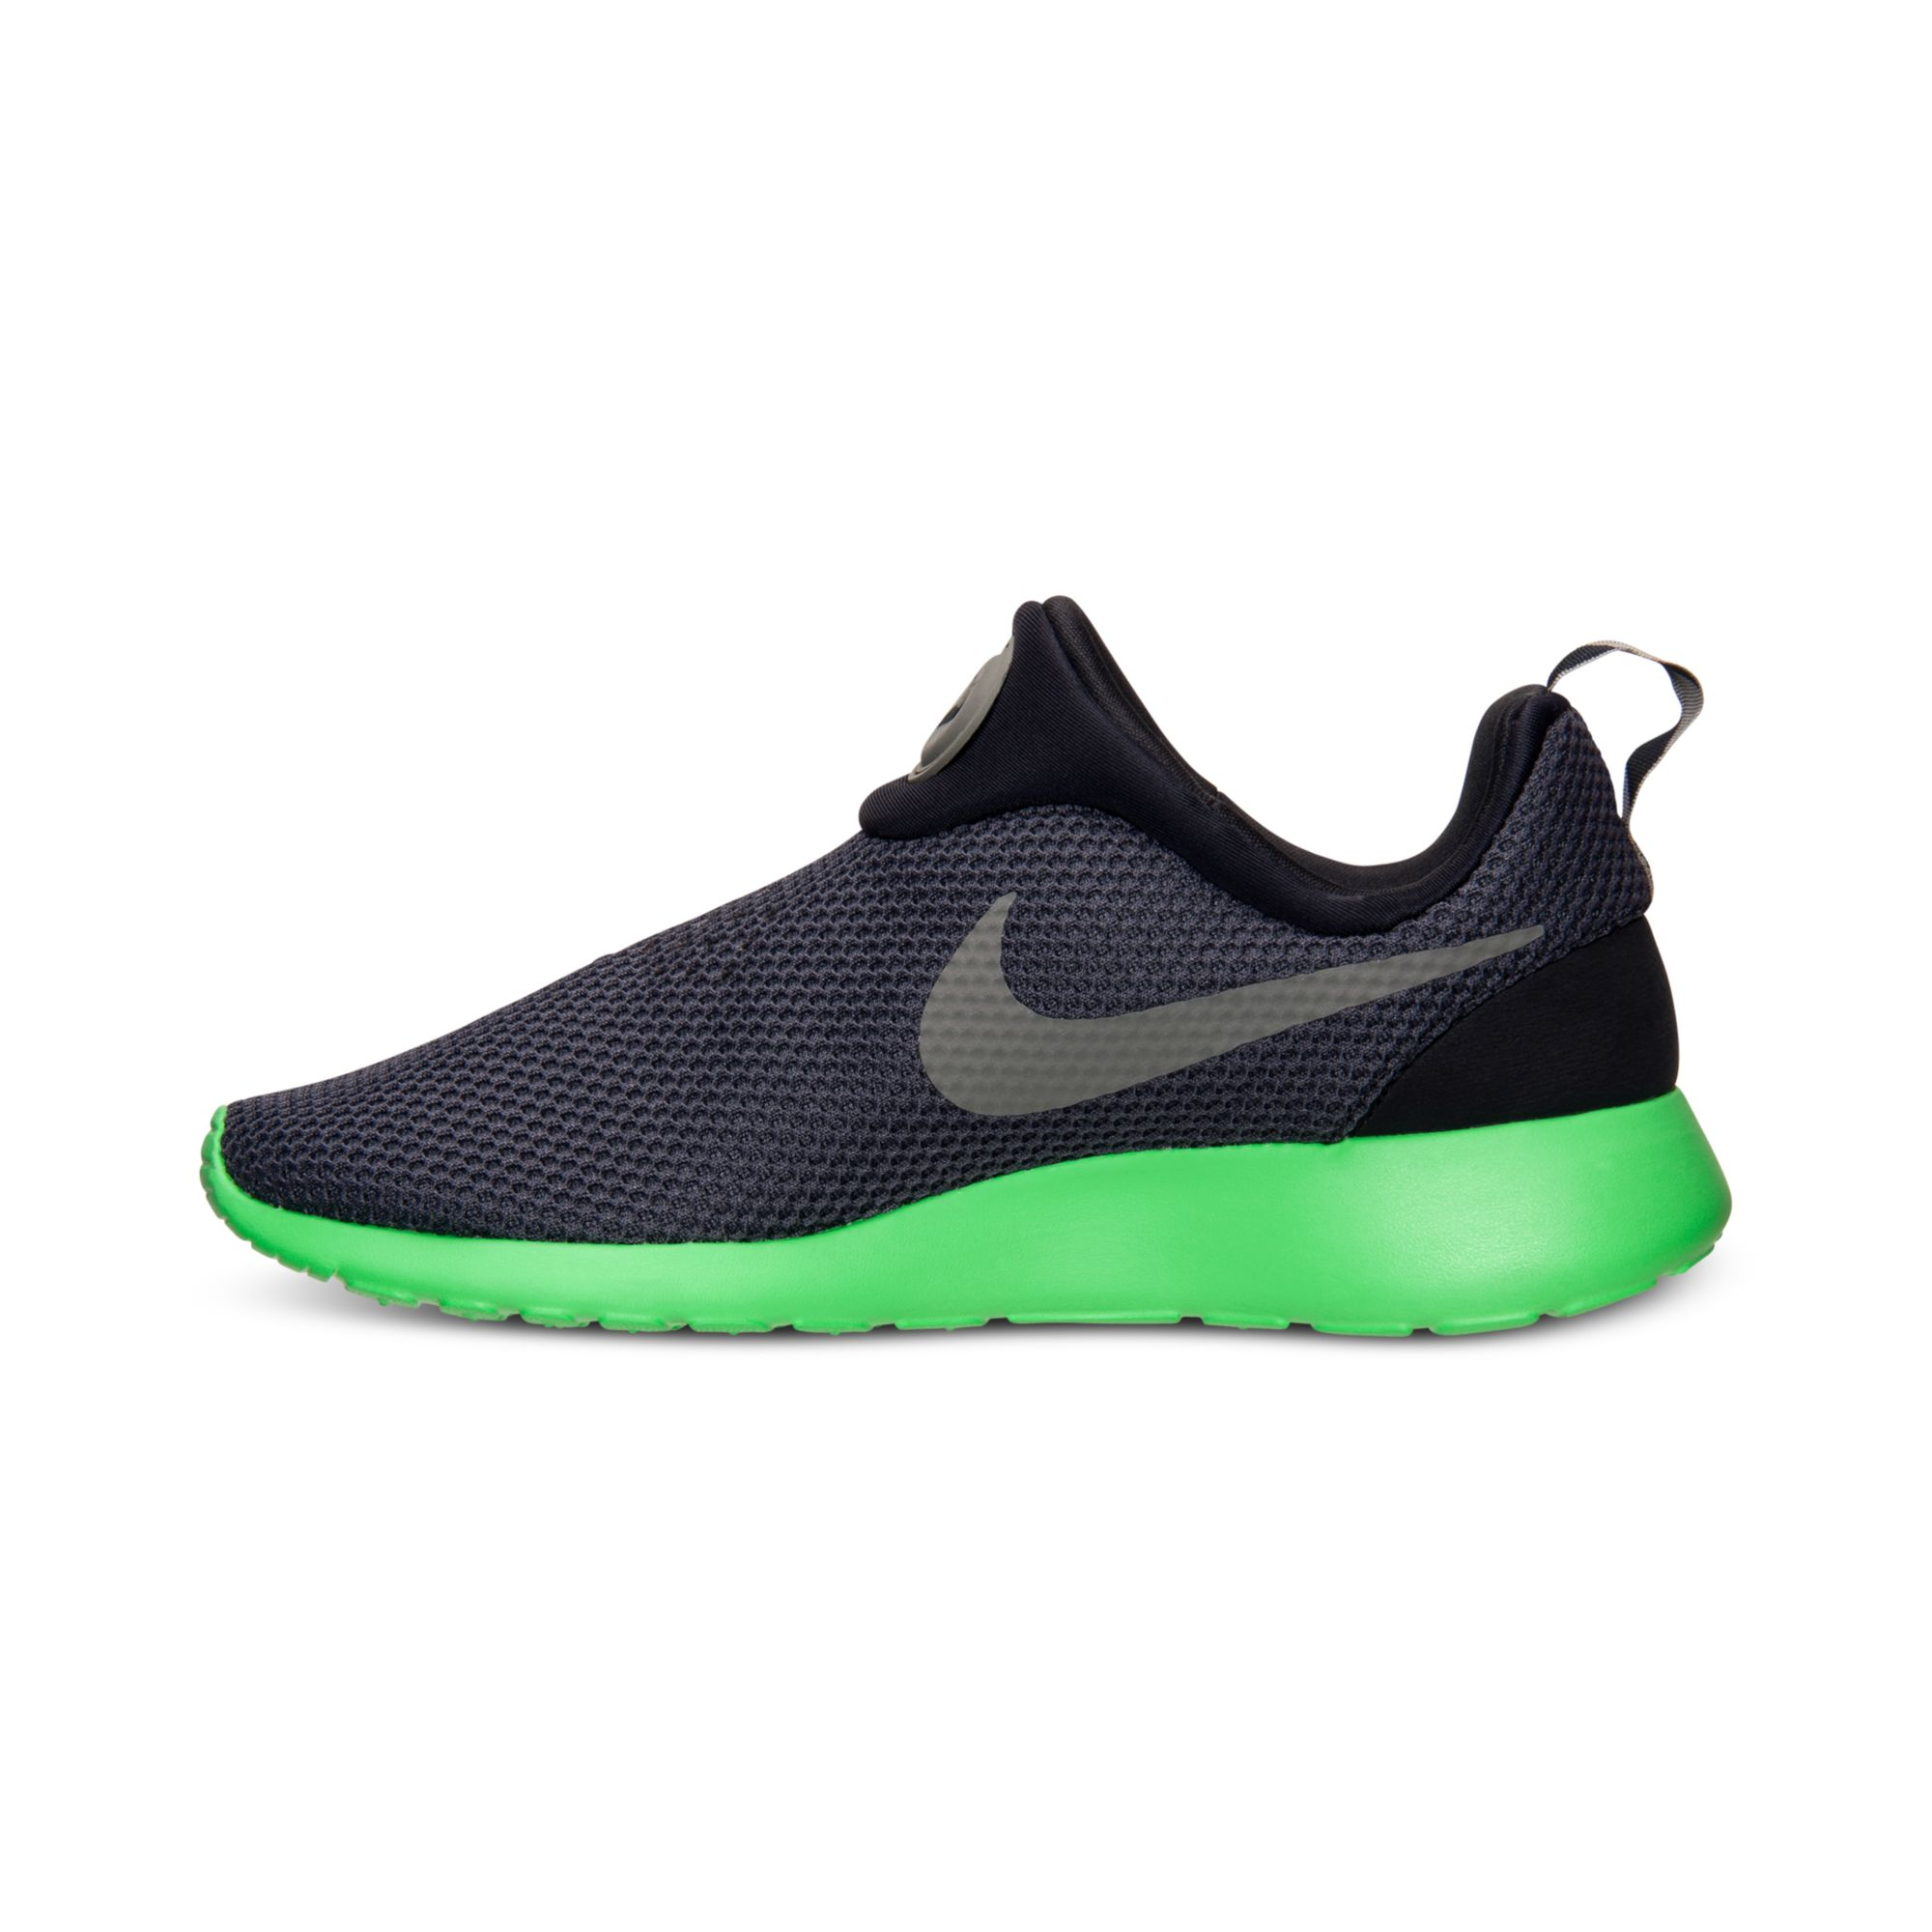 Lyst - Nike Mens Roshe Run Slip On Casual Sneakers From Finish Line in ...